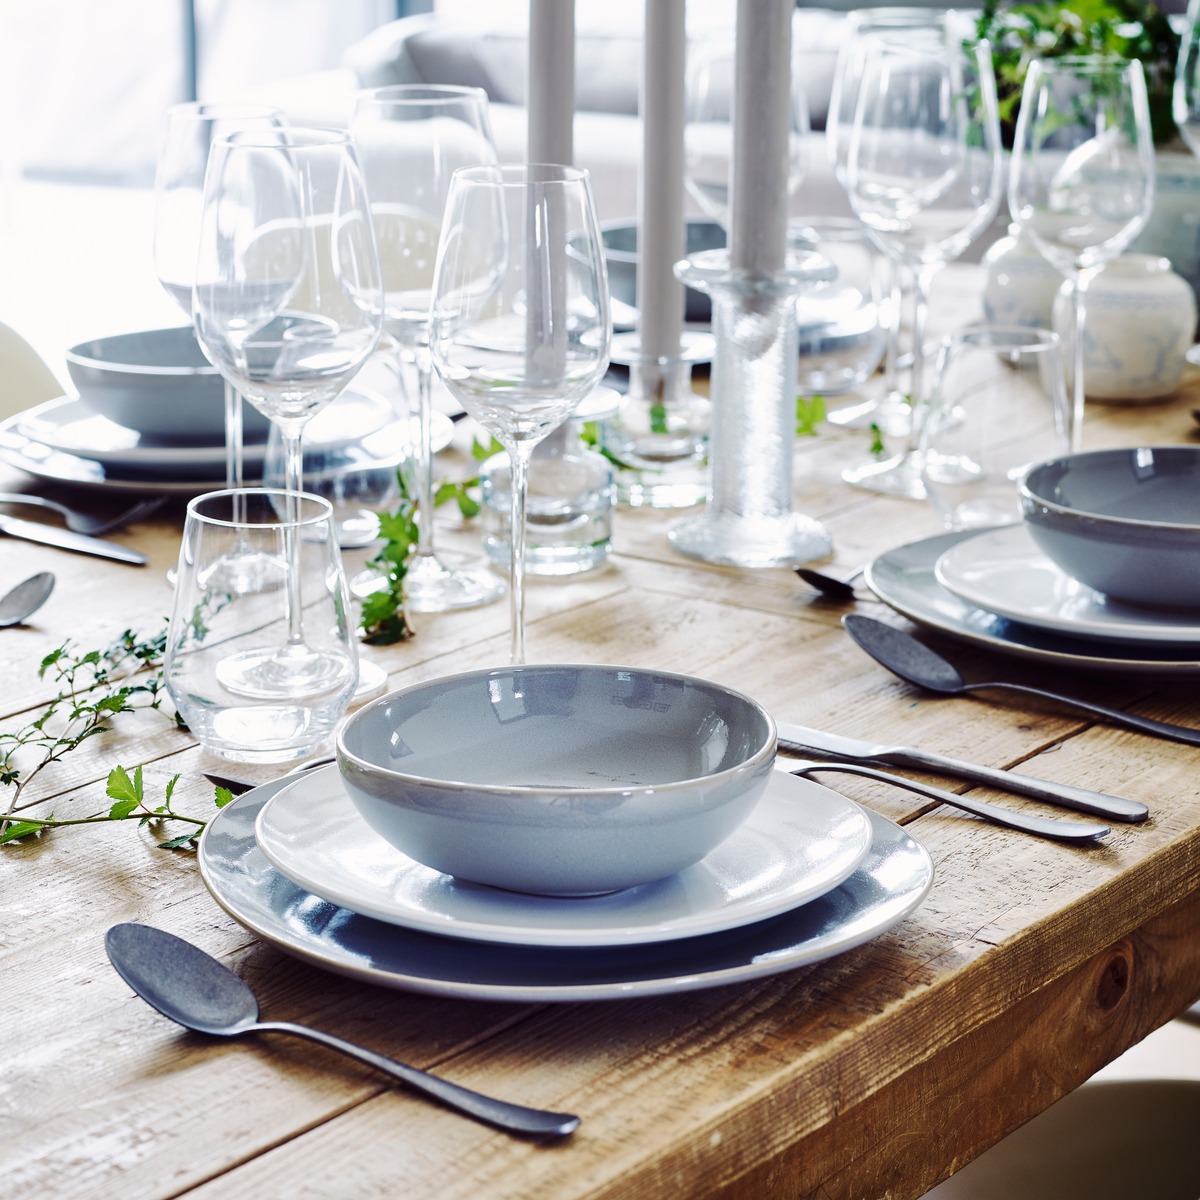  - Shop by Category - Tableware